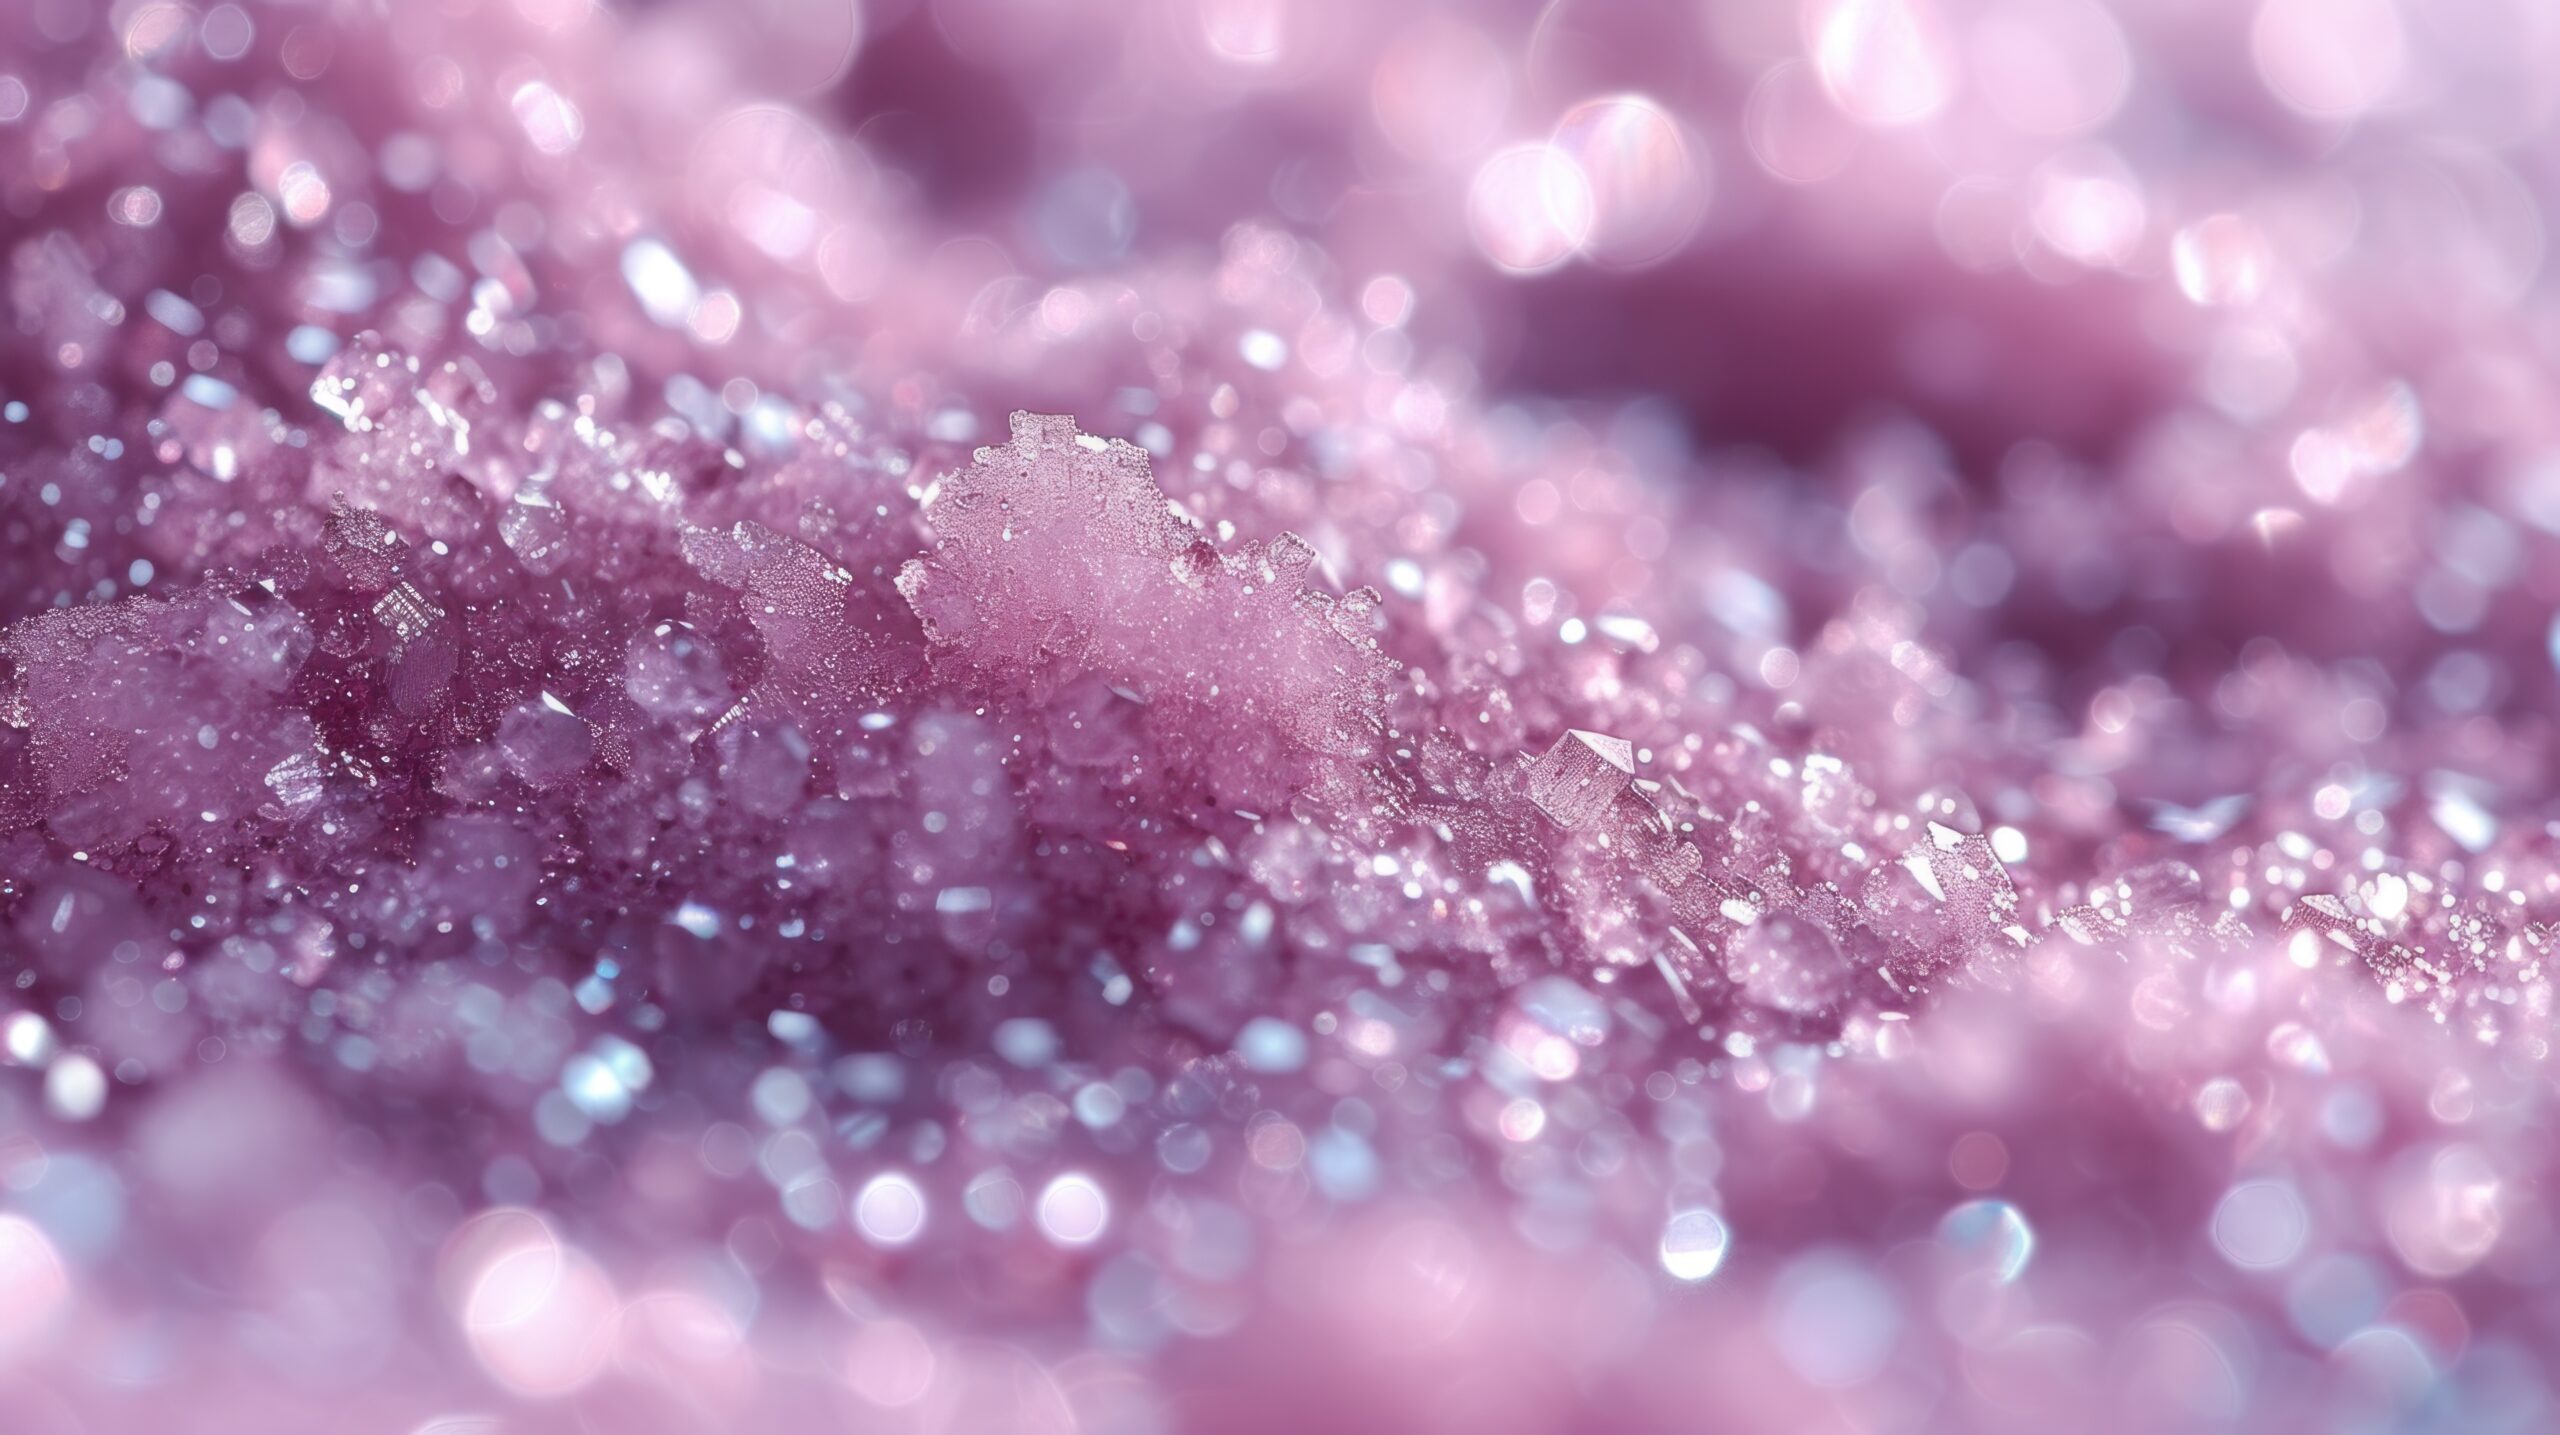 a close up view of a pink and purple background with lots of small bubbles on the top of the image.